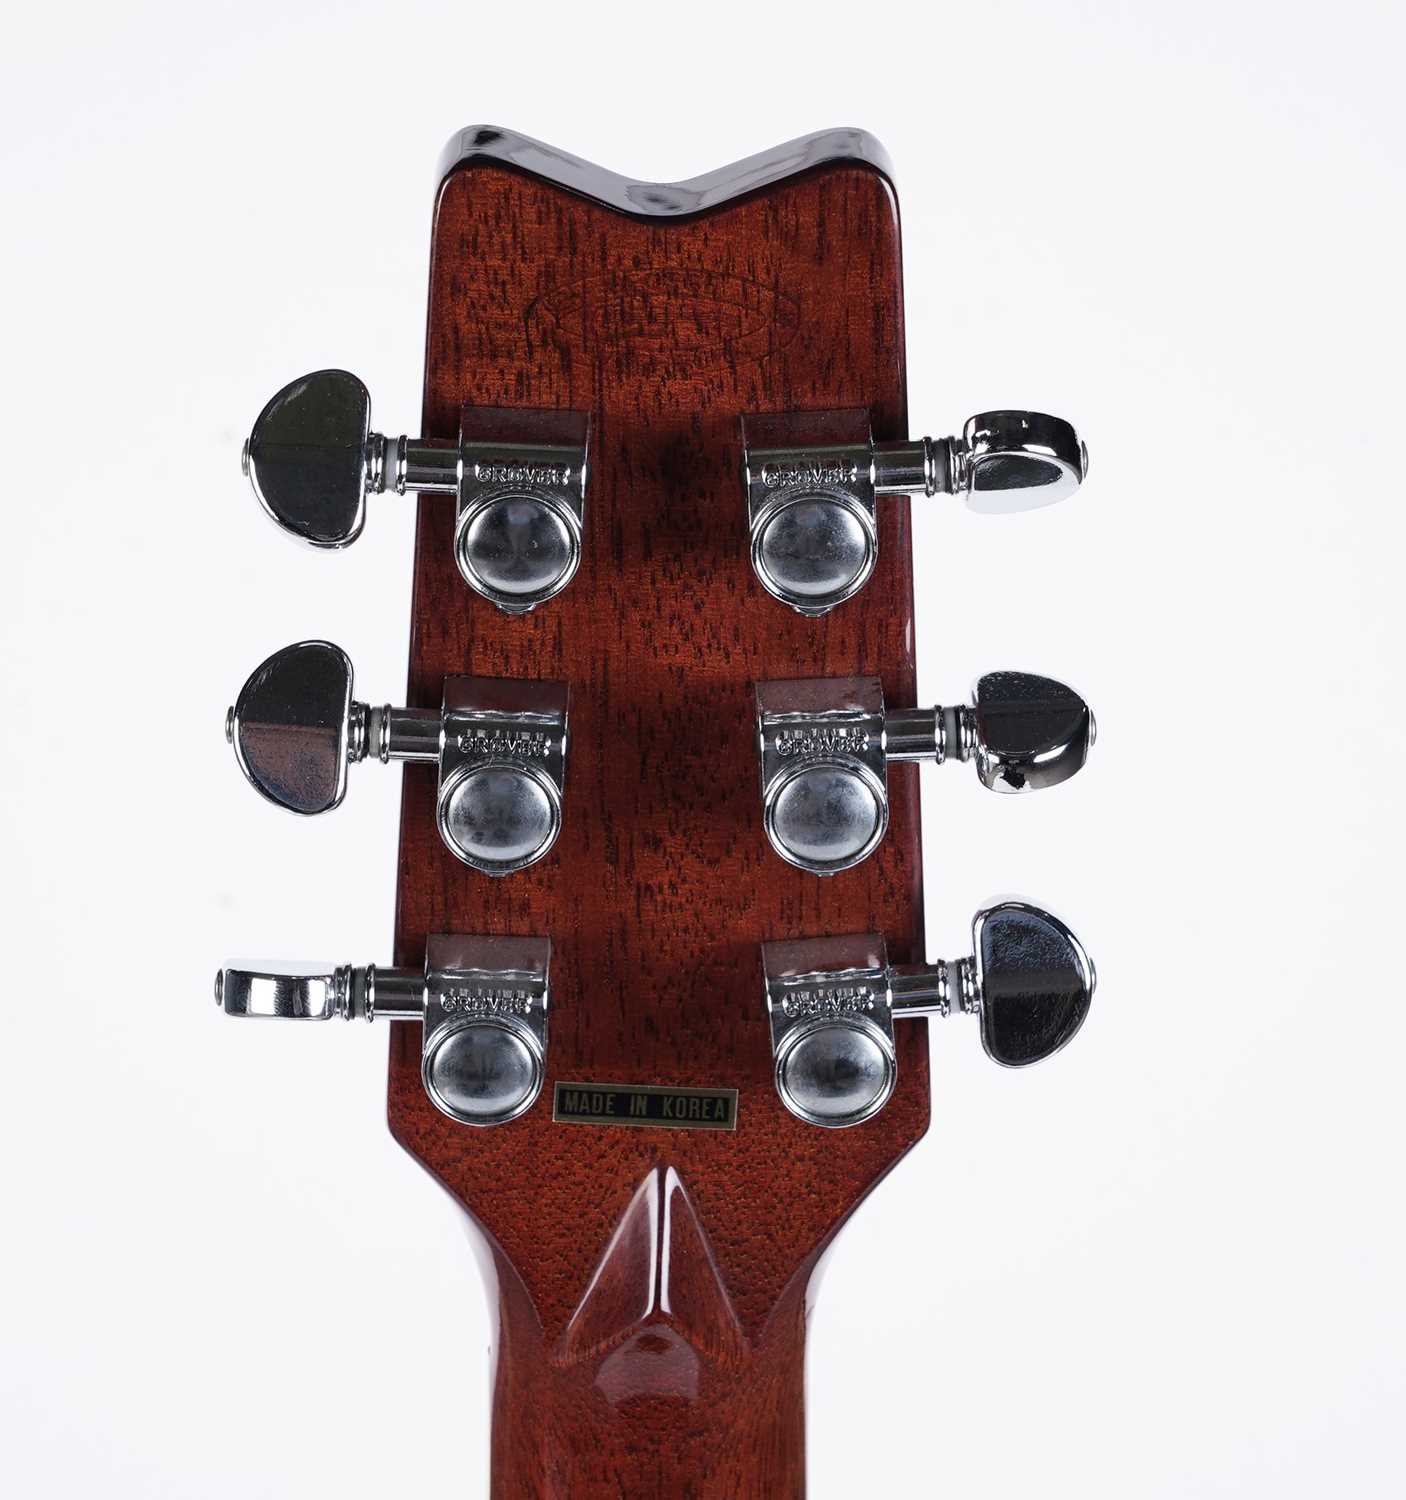 Washburn D-25S/TS dreadnought acoustic guitar - Image 5 of 10